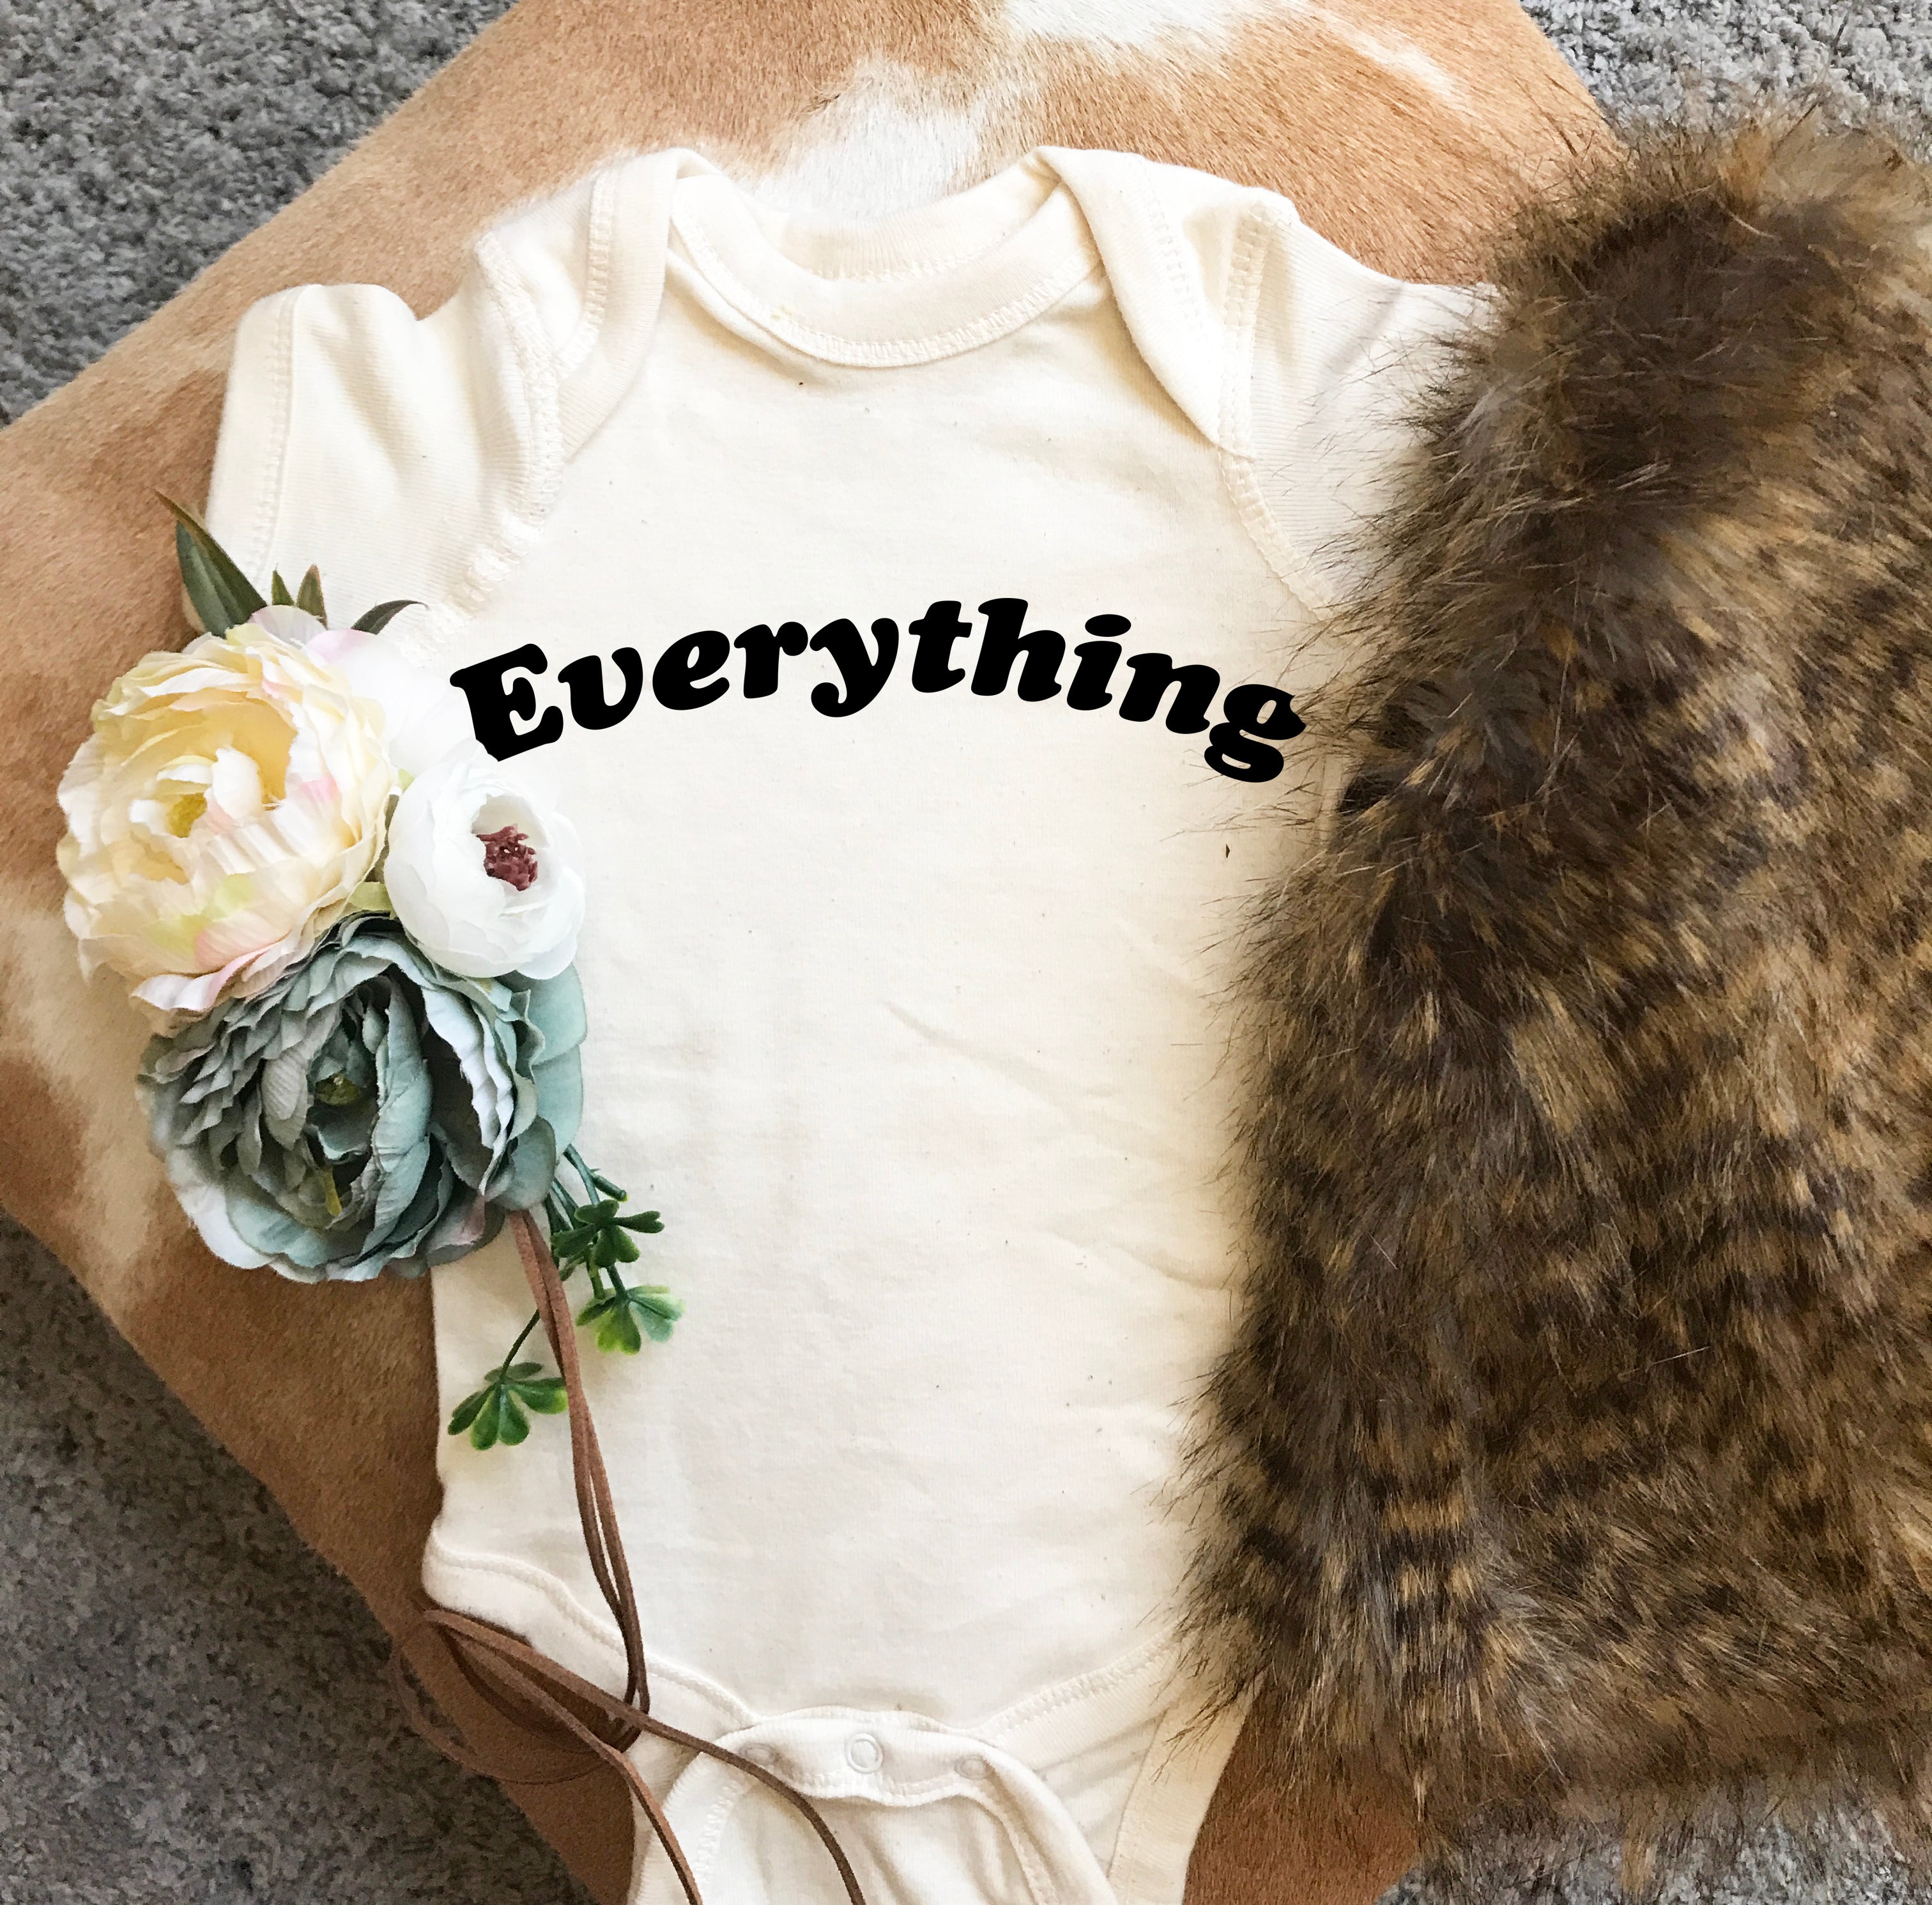 « EVERYTHING IS GOING TO BE F*CKING AMAZING » CREAM UNISEX TEE